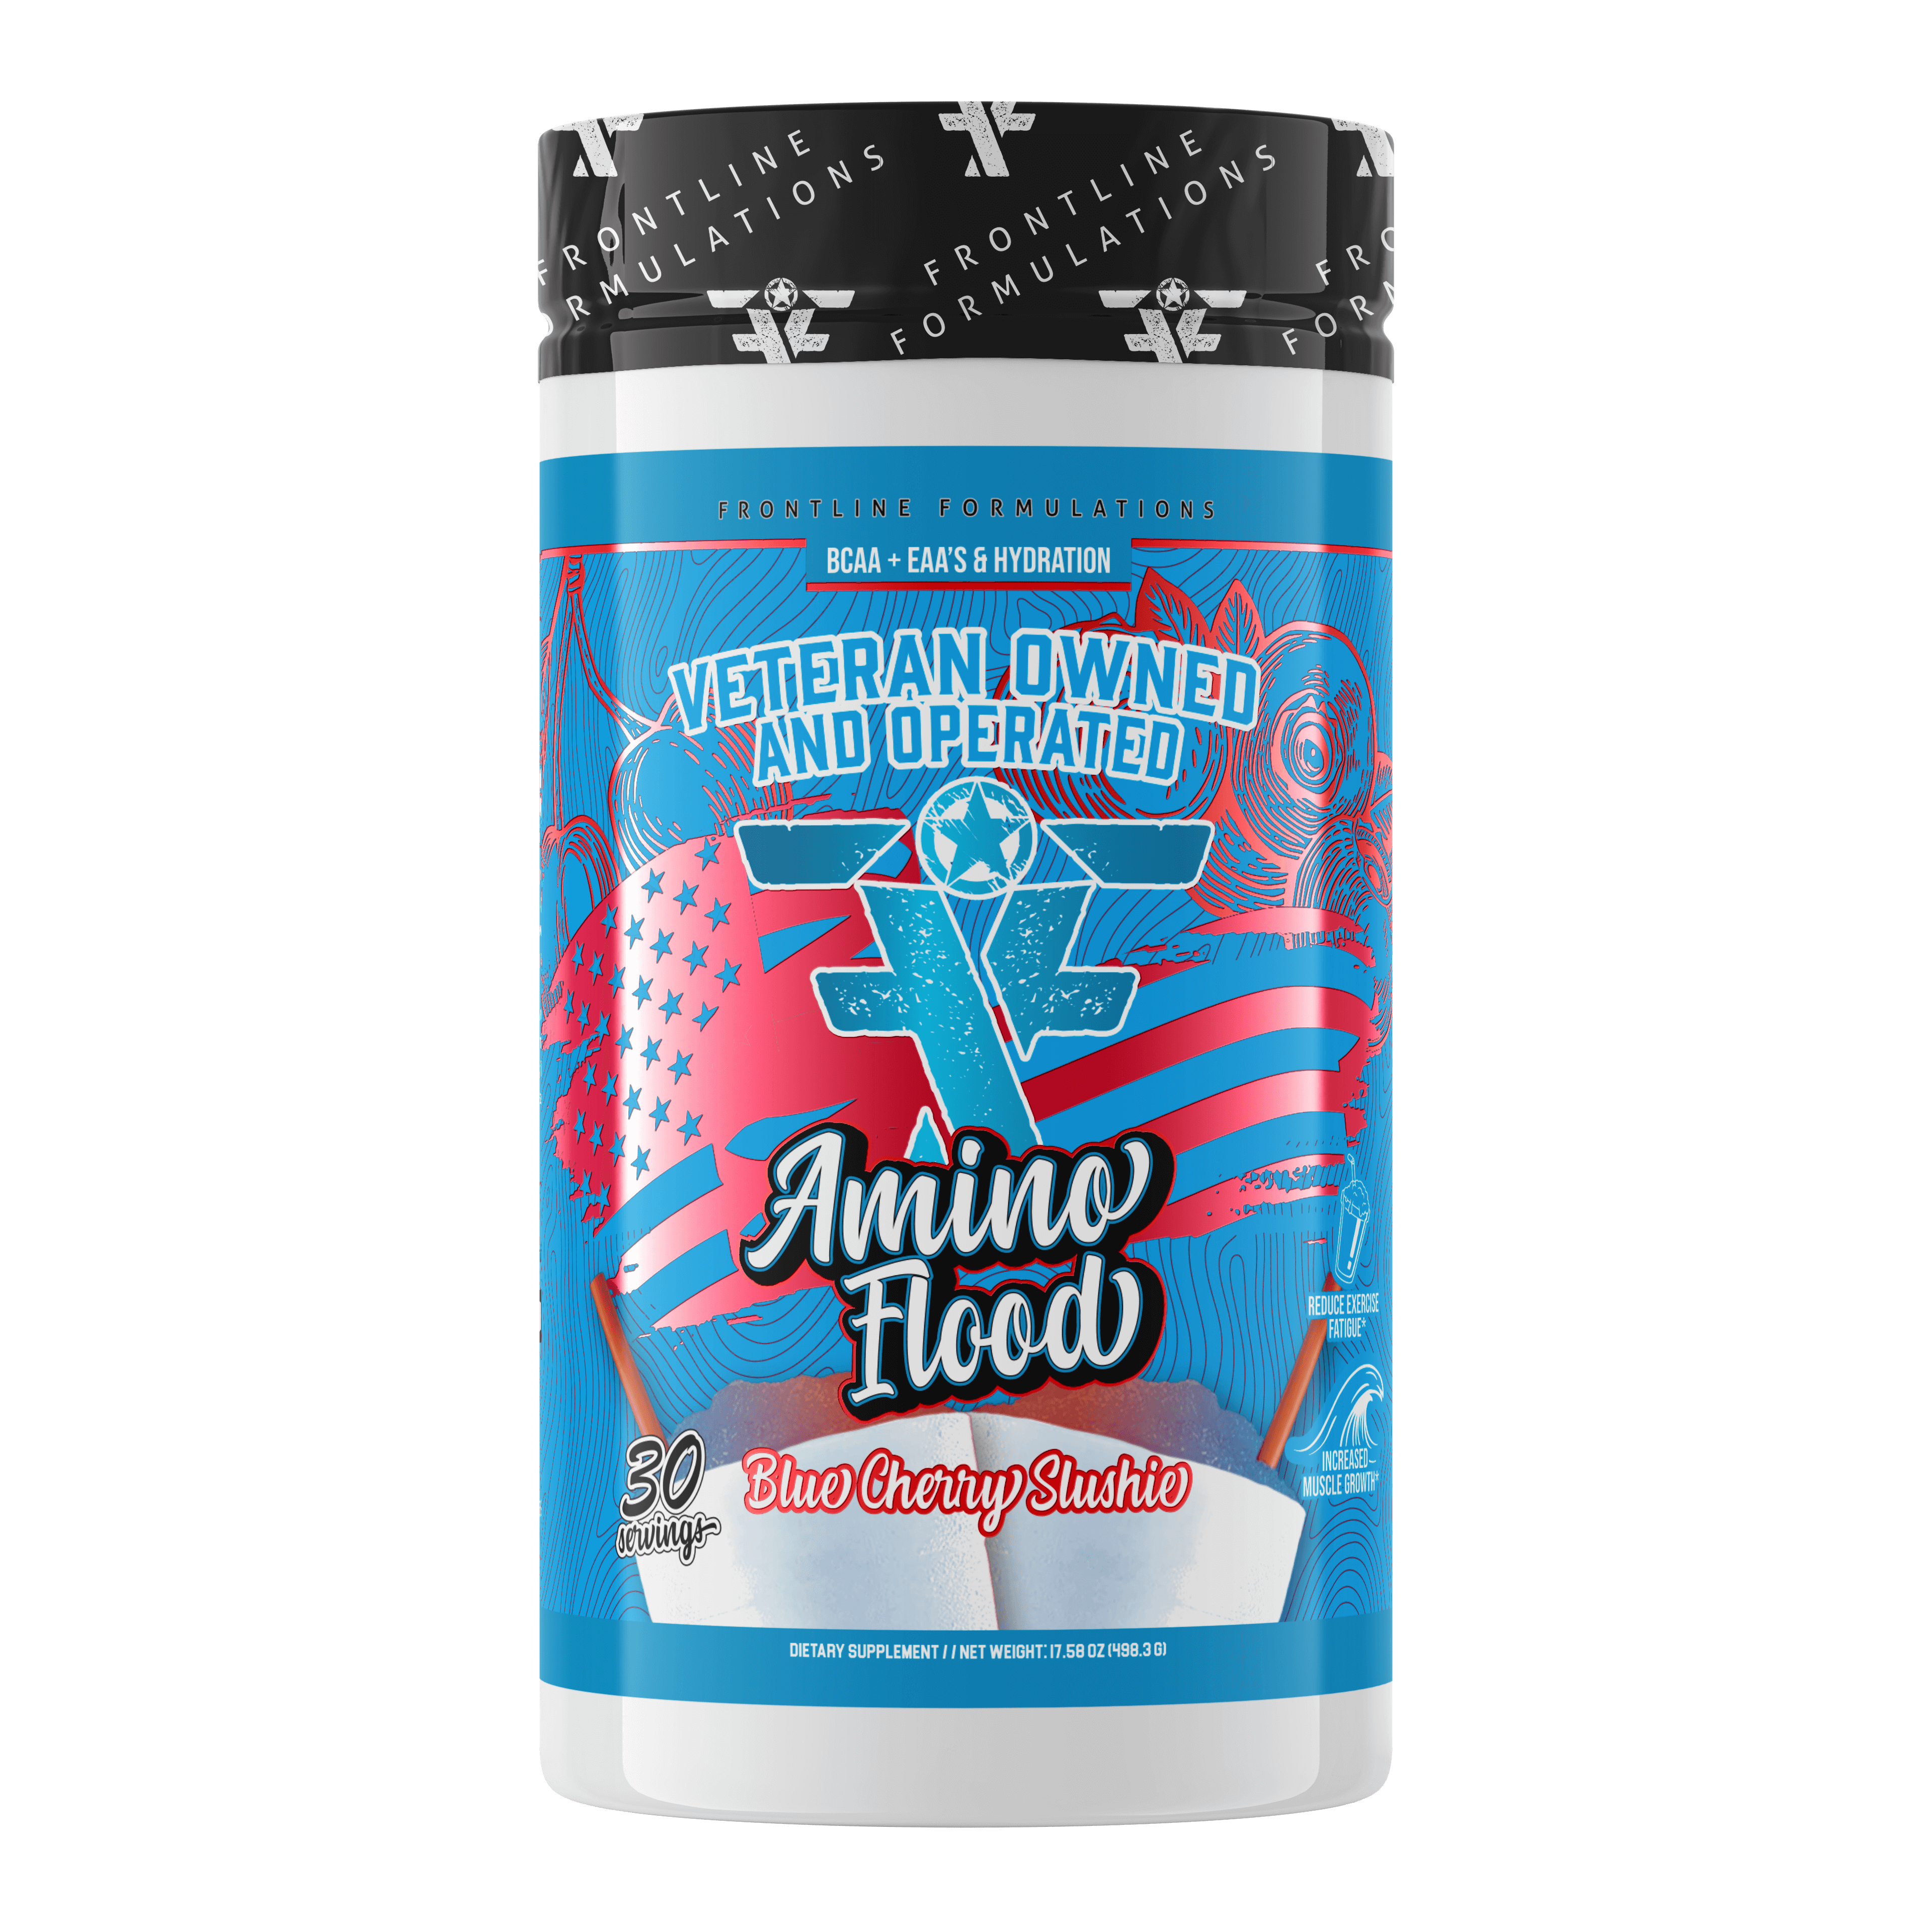 Amino Flood Branched-Chain Amino Acids (BCAAs) and Essential Amino Acids (EAAs) are both vital components for overall health, muscle growth, and various bodily functions. They are crucial in supporting protein synthesis, which is essential for building an